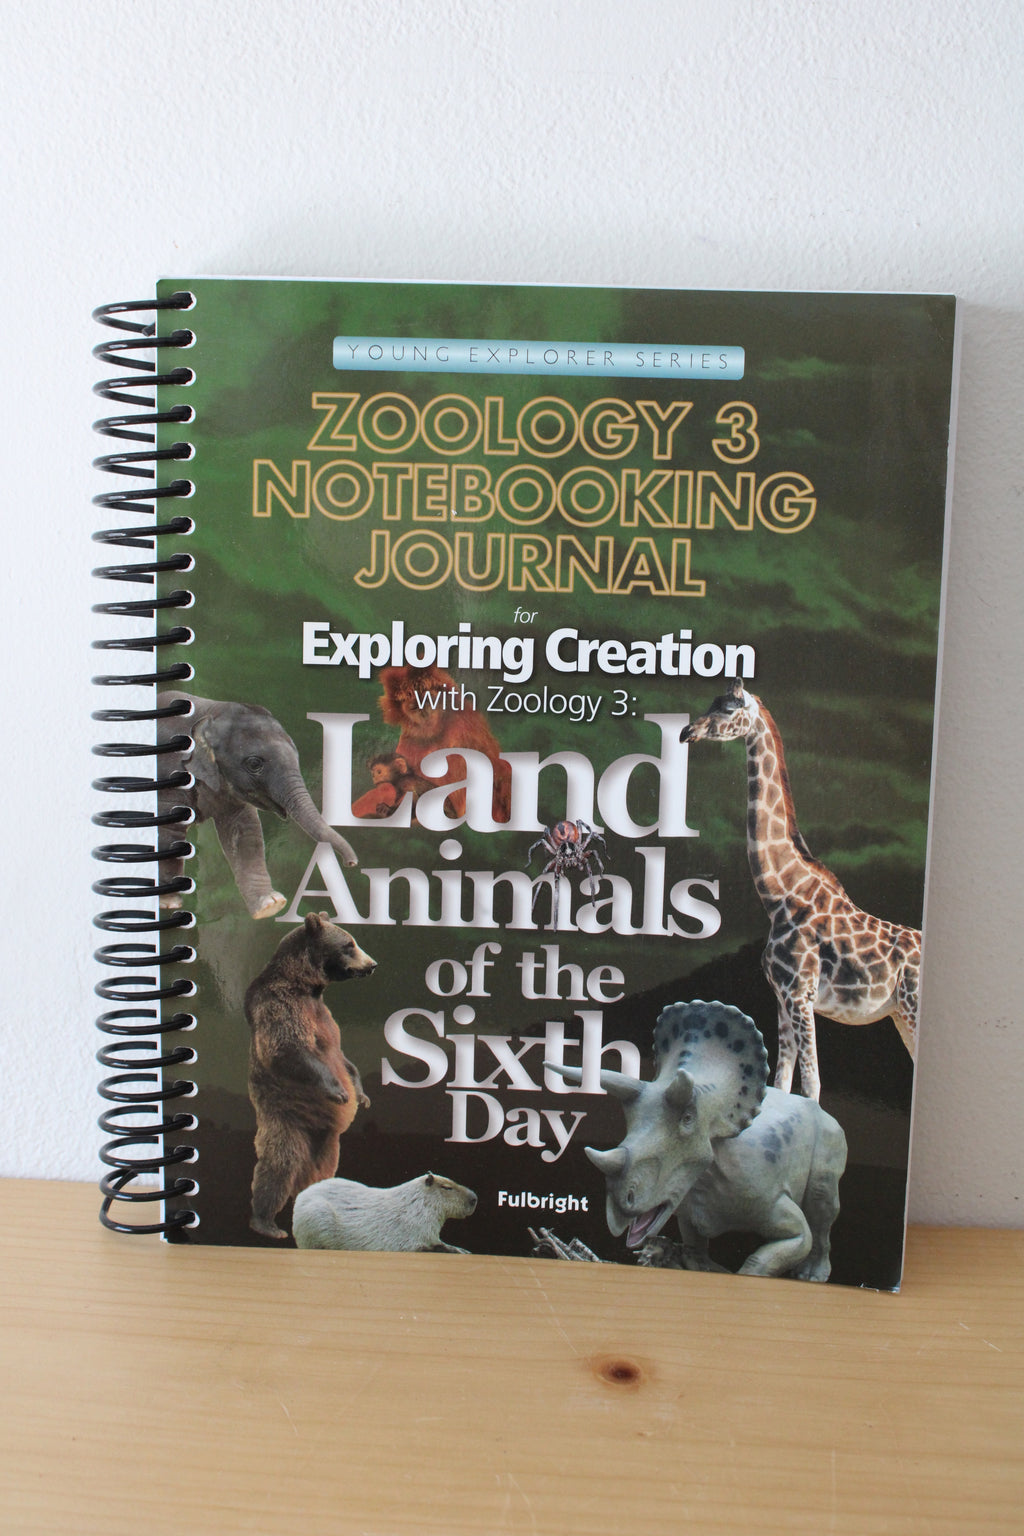 Zoology 3 Notebooking Journal For Exploring Creation With Zoology 3: Land Animals Of The Sixth Day By Jeanie Fulbright